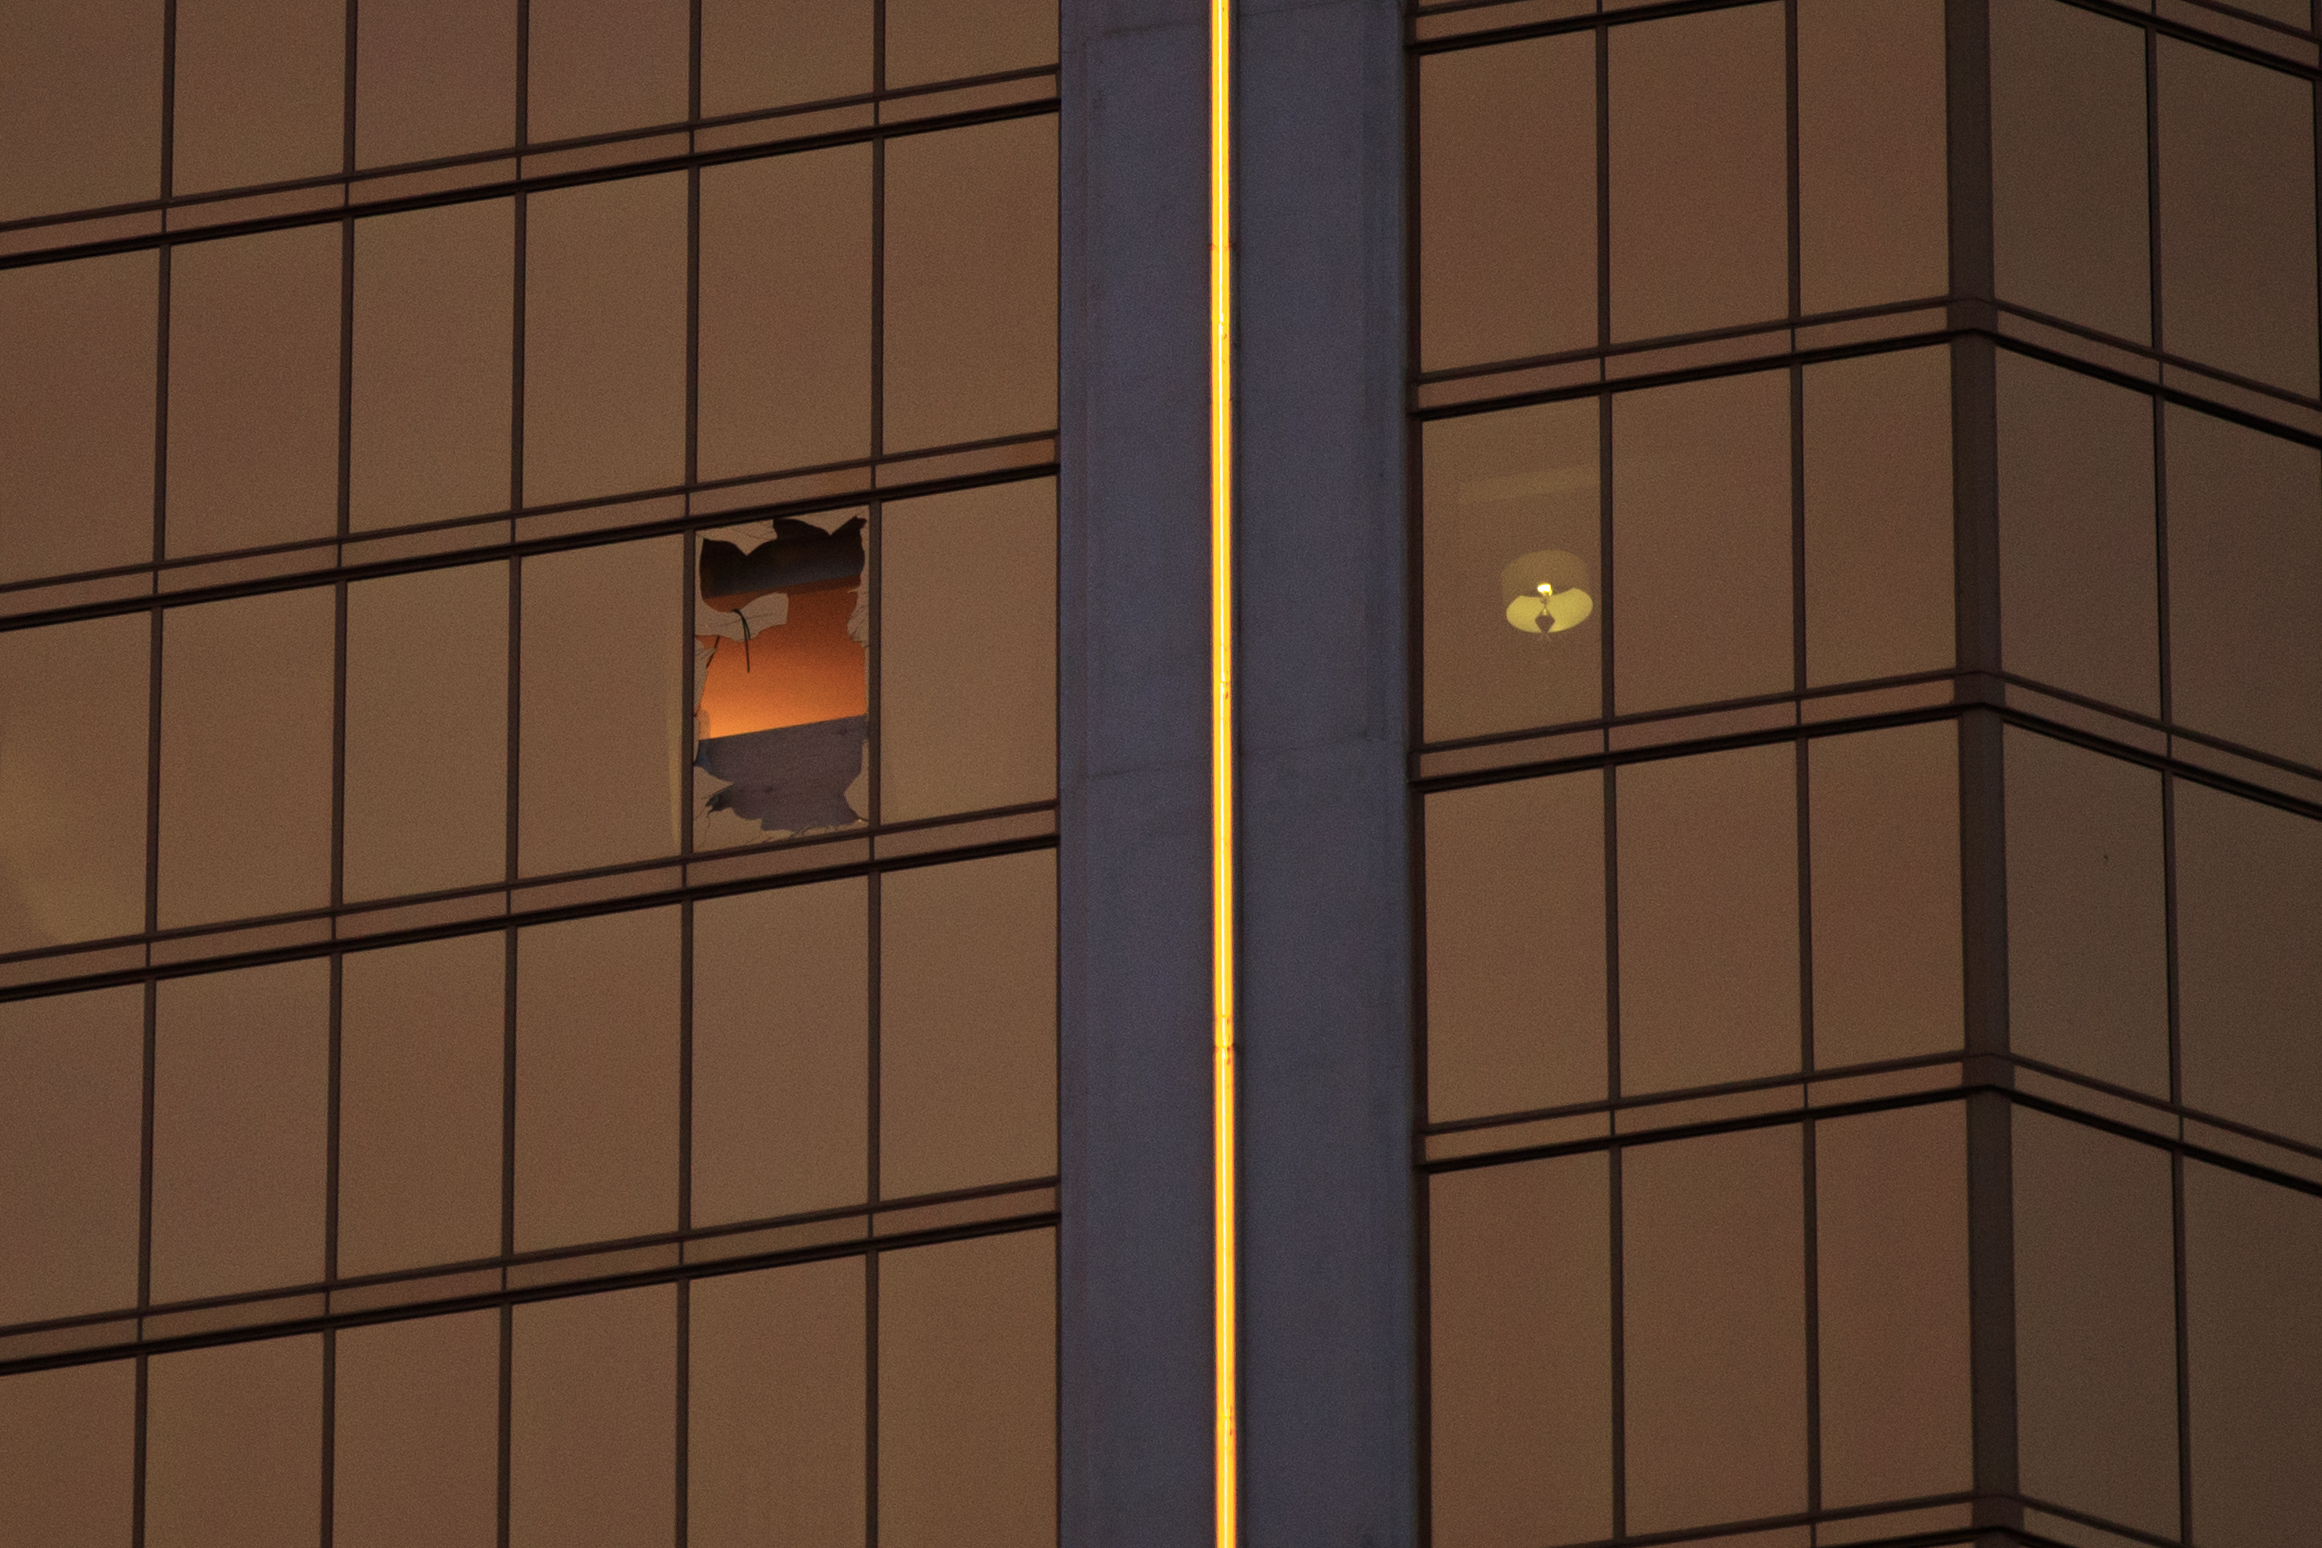 A window is broken on the 32nd floor of the Mandalay Bay Resort and Casino where a gunman opened fire on a concert crowd on Sunday night, Oct. 3, 2017 in Las Vegas. (Drew Angerer—Getty Images)